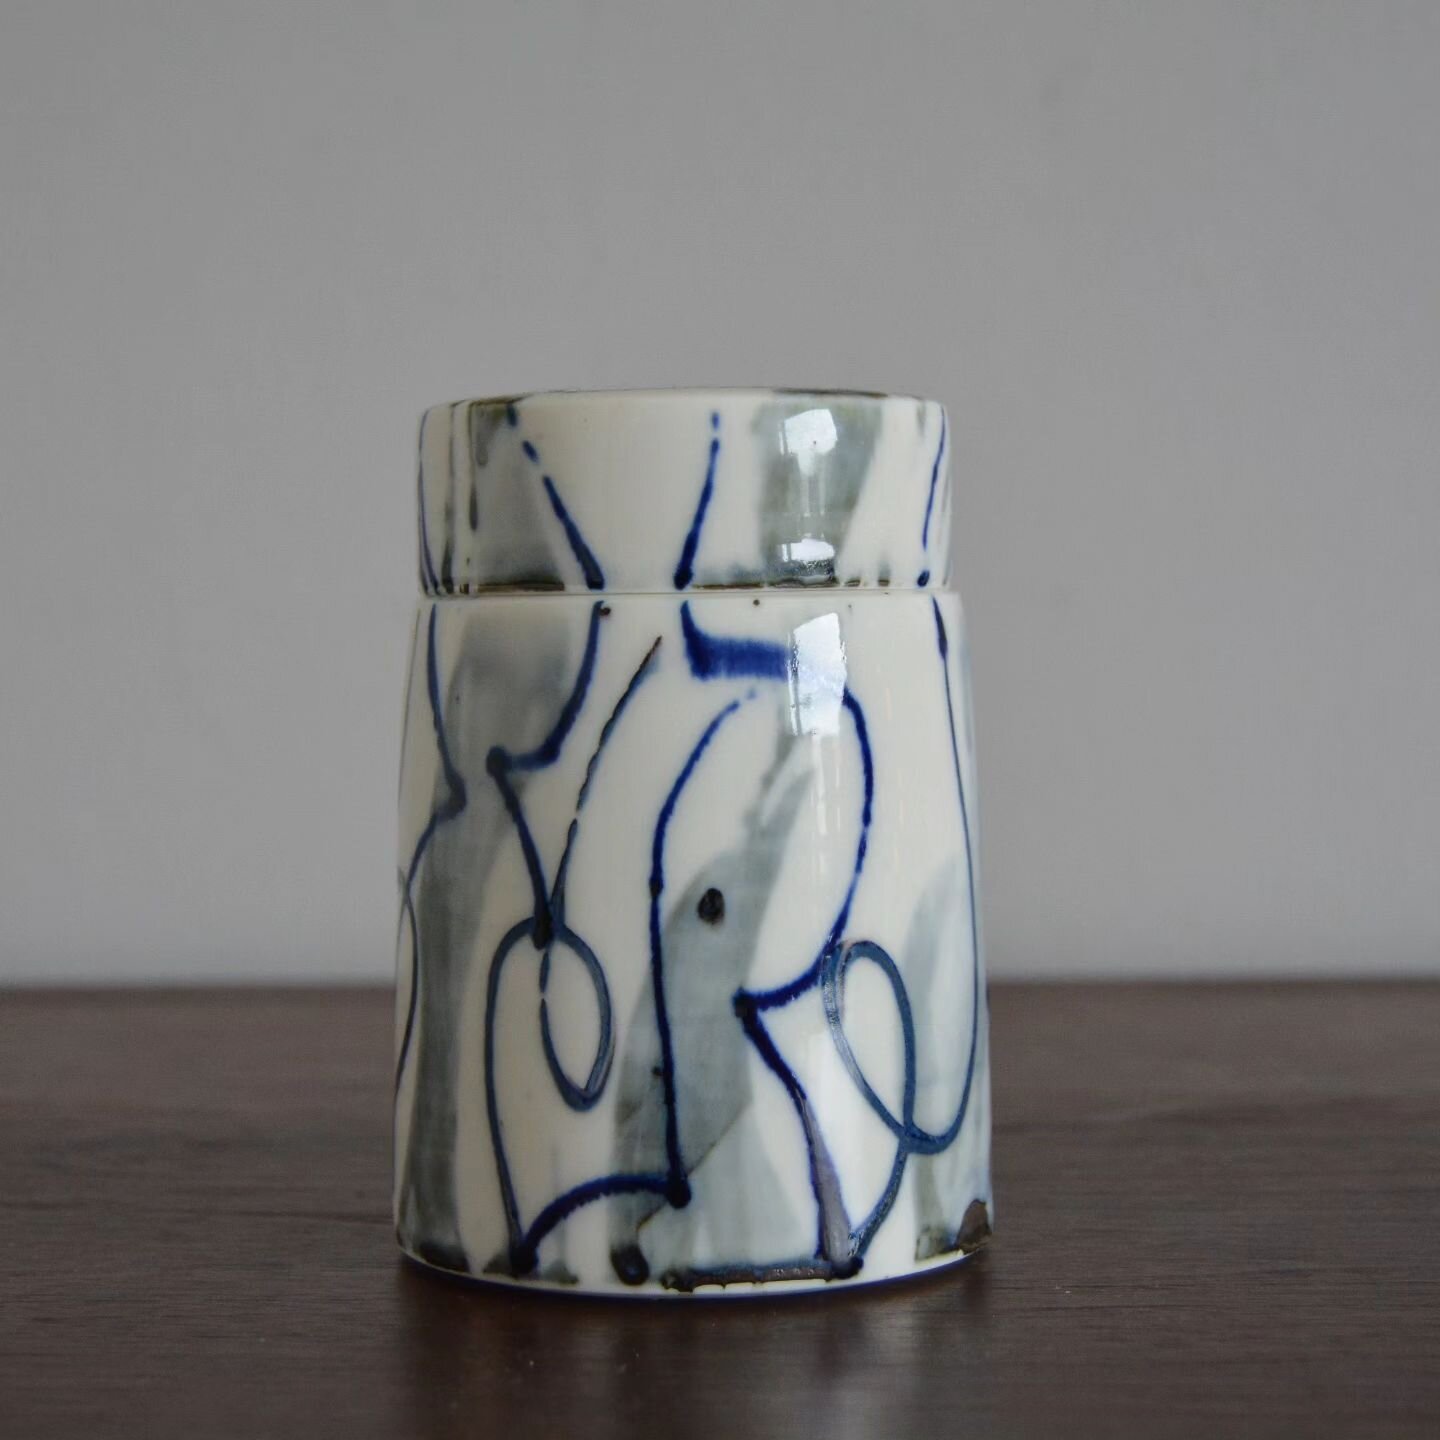 1 week to go until the shop drop ☺️ This small lidded jar is one of the pieces that will be available. Made from porcelain and decorated with a cobalt blue brush stroke and line design. 

There are around 20 of these available, all with varying decor